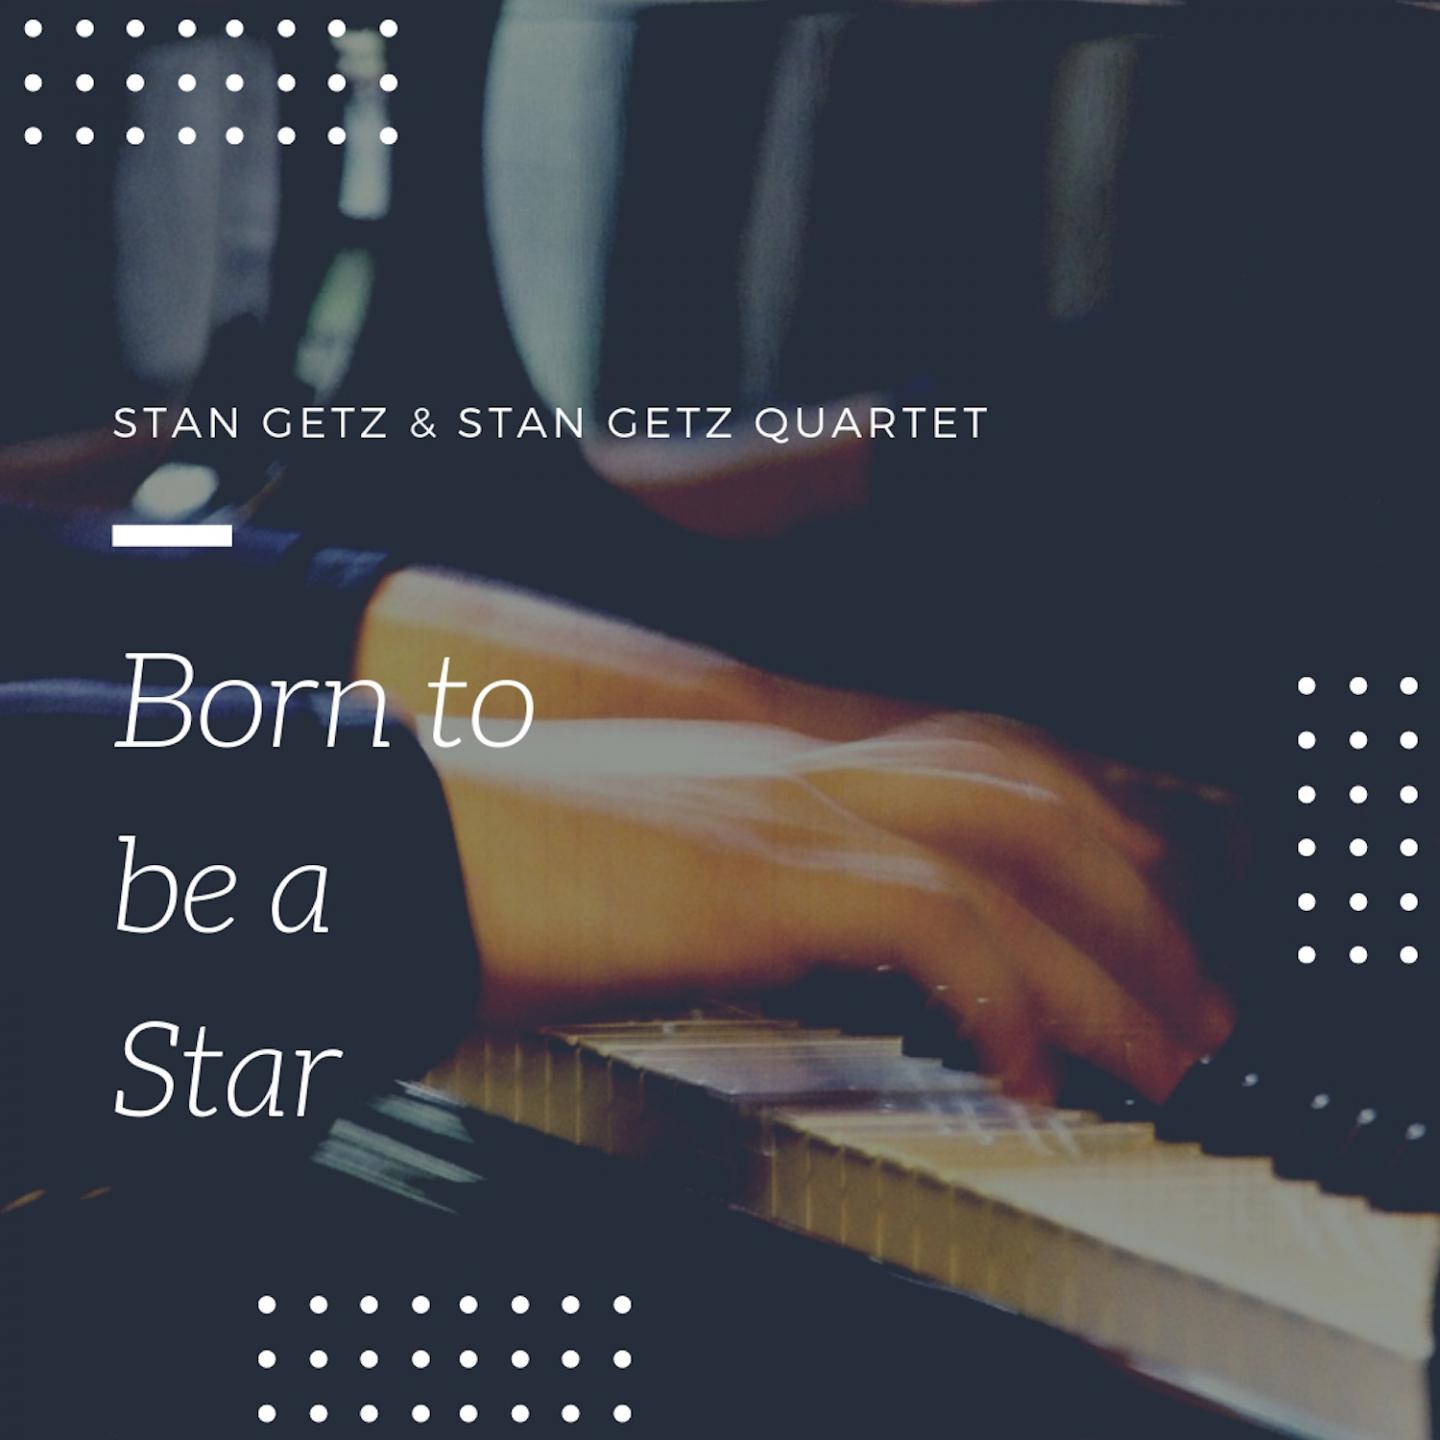 Born to be a Star